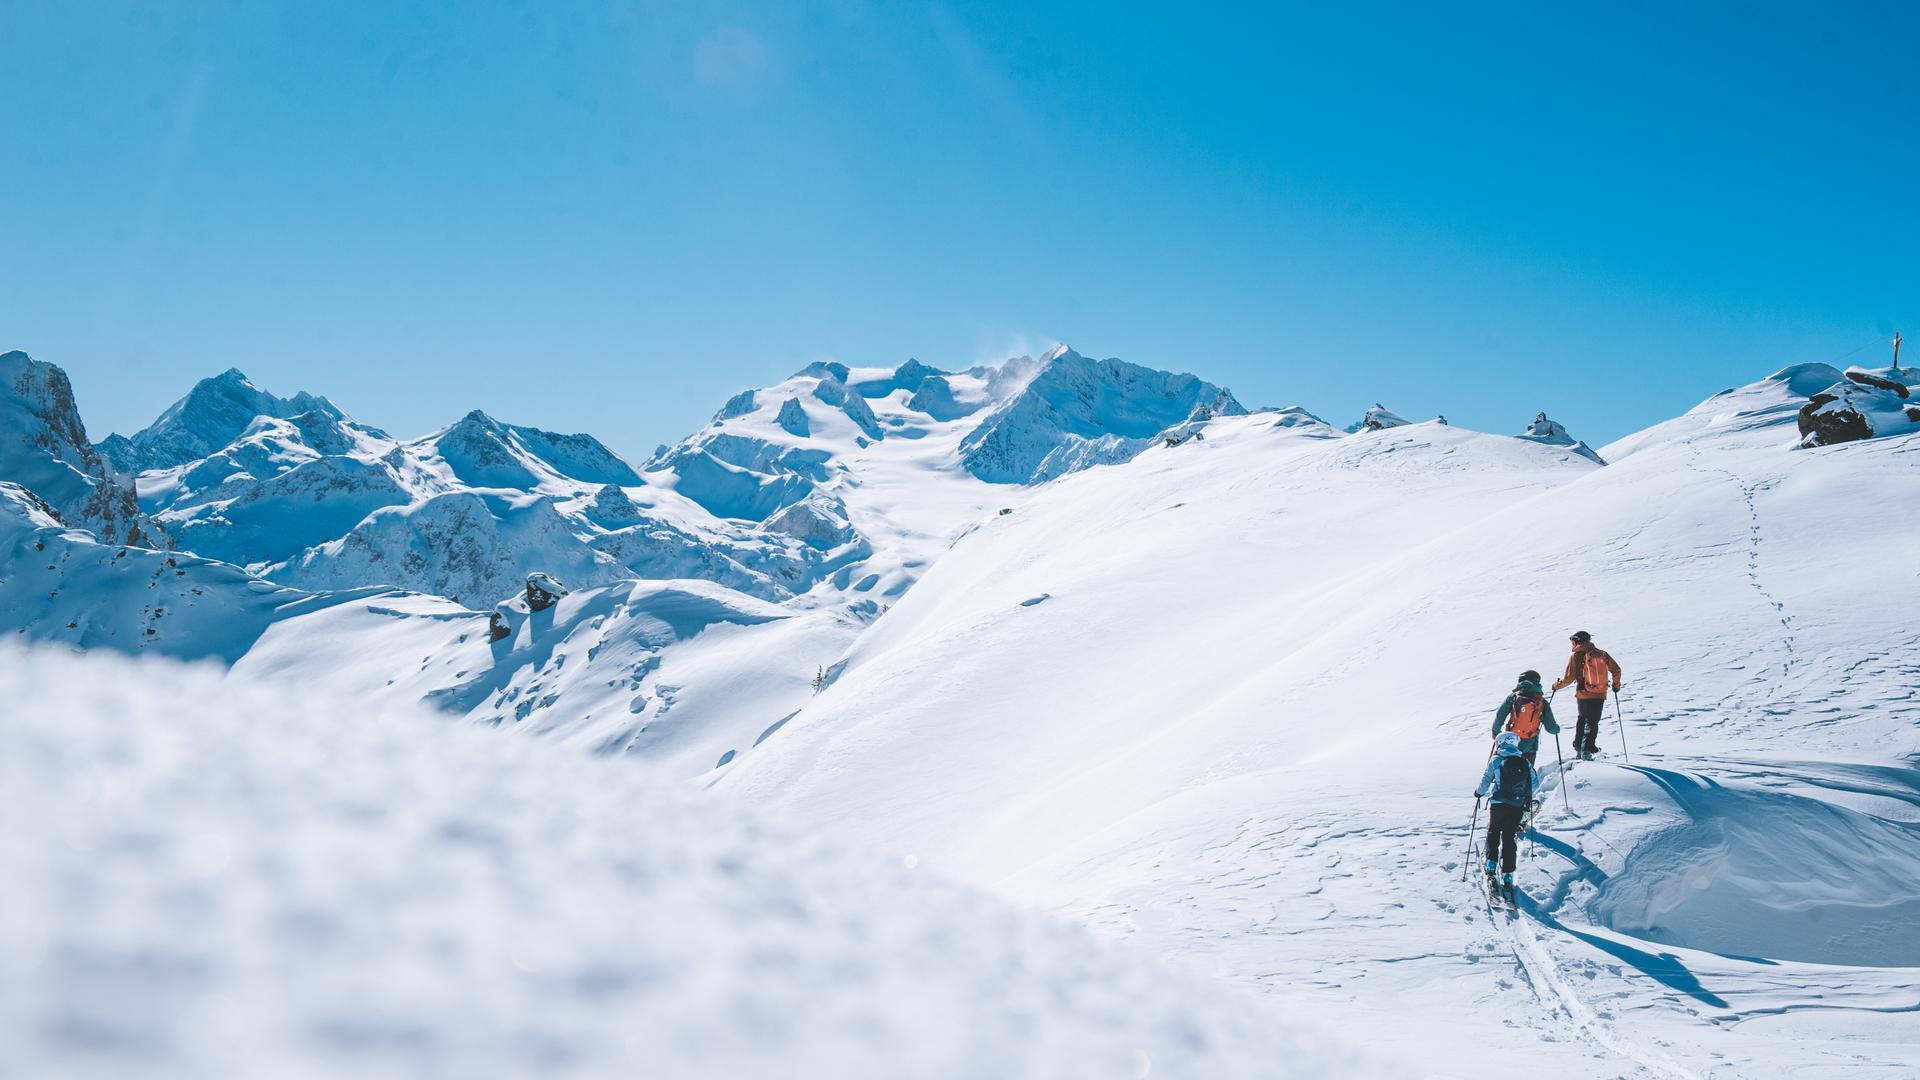 Take off for the summits with our ski touring itineraries in Courchevel